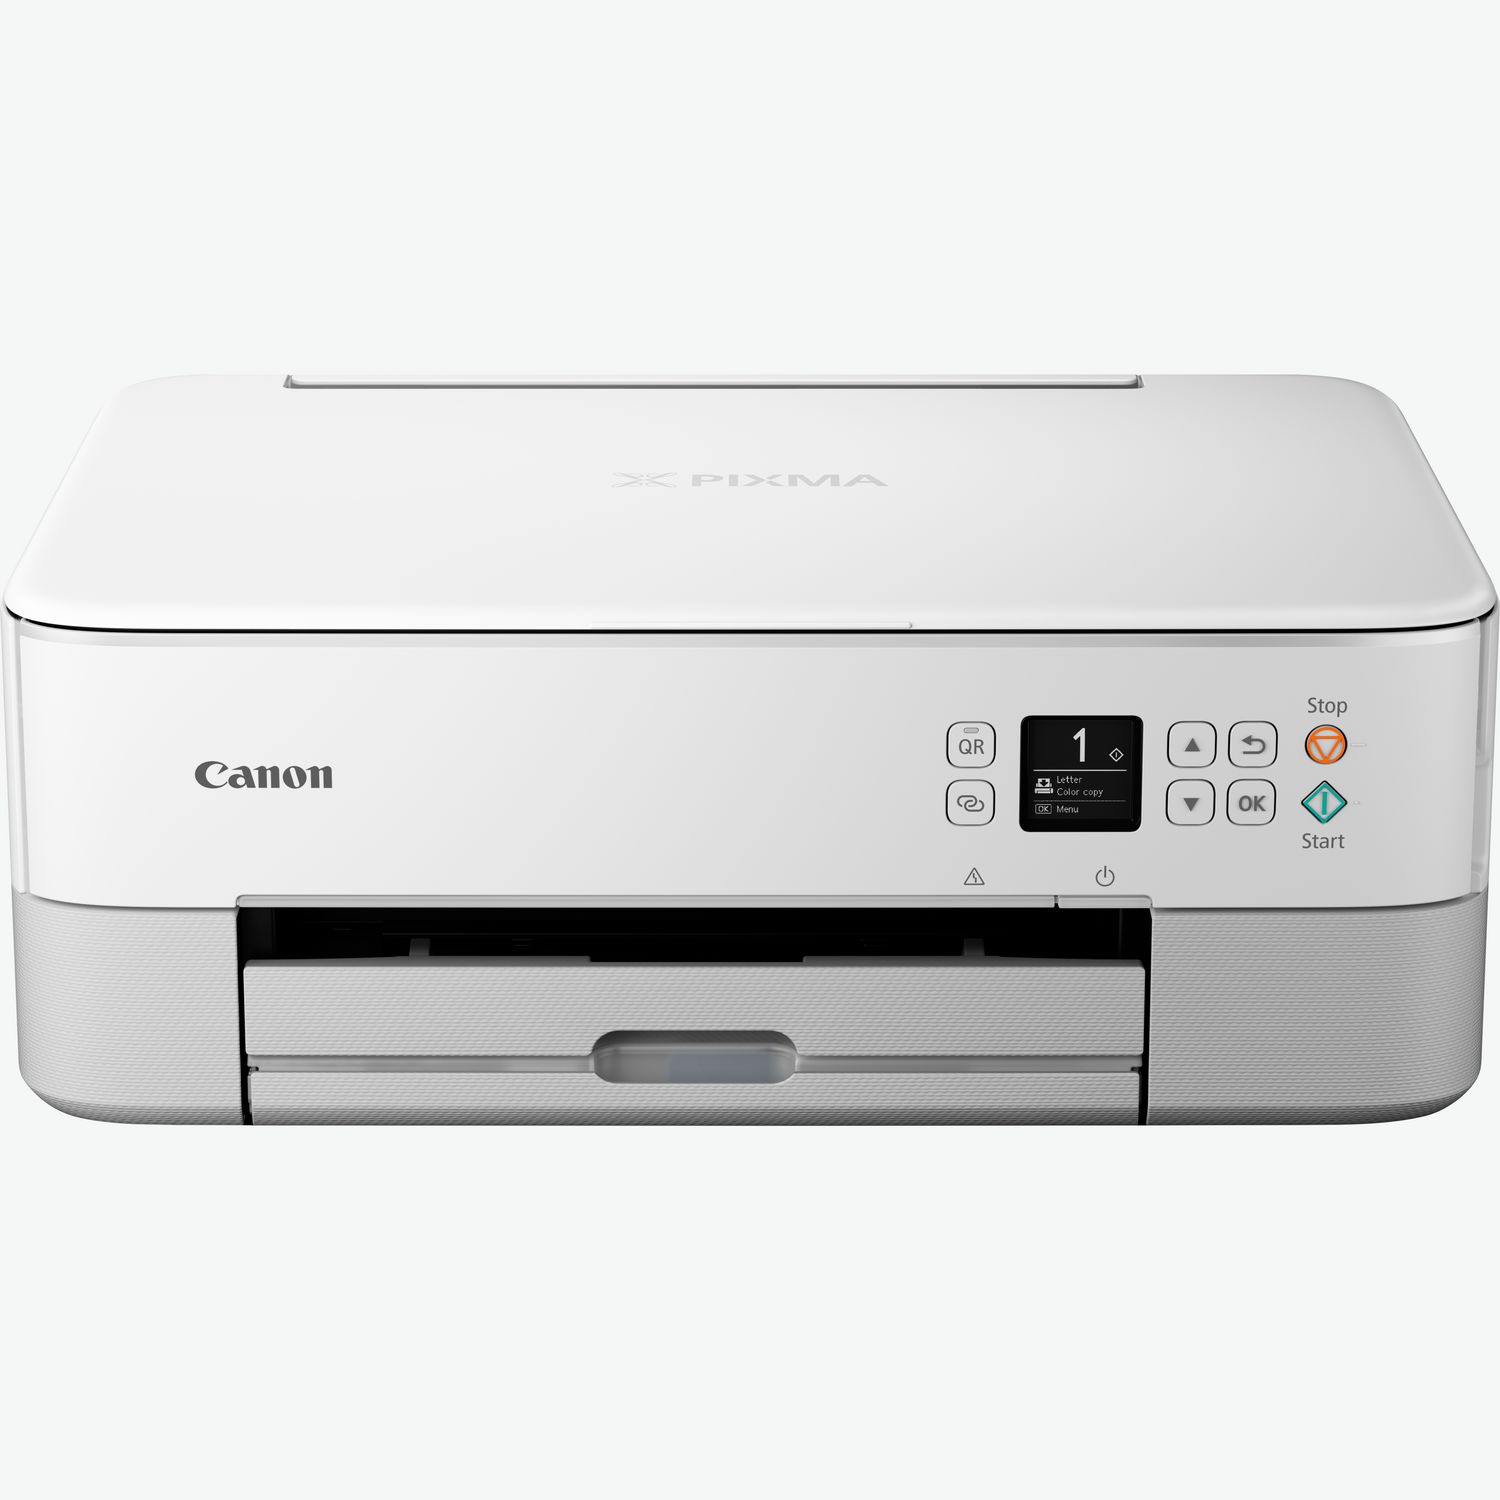 How To Print Photos From Smartphone Canon Pixma TS5050 Printer 